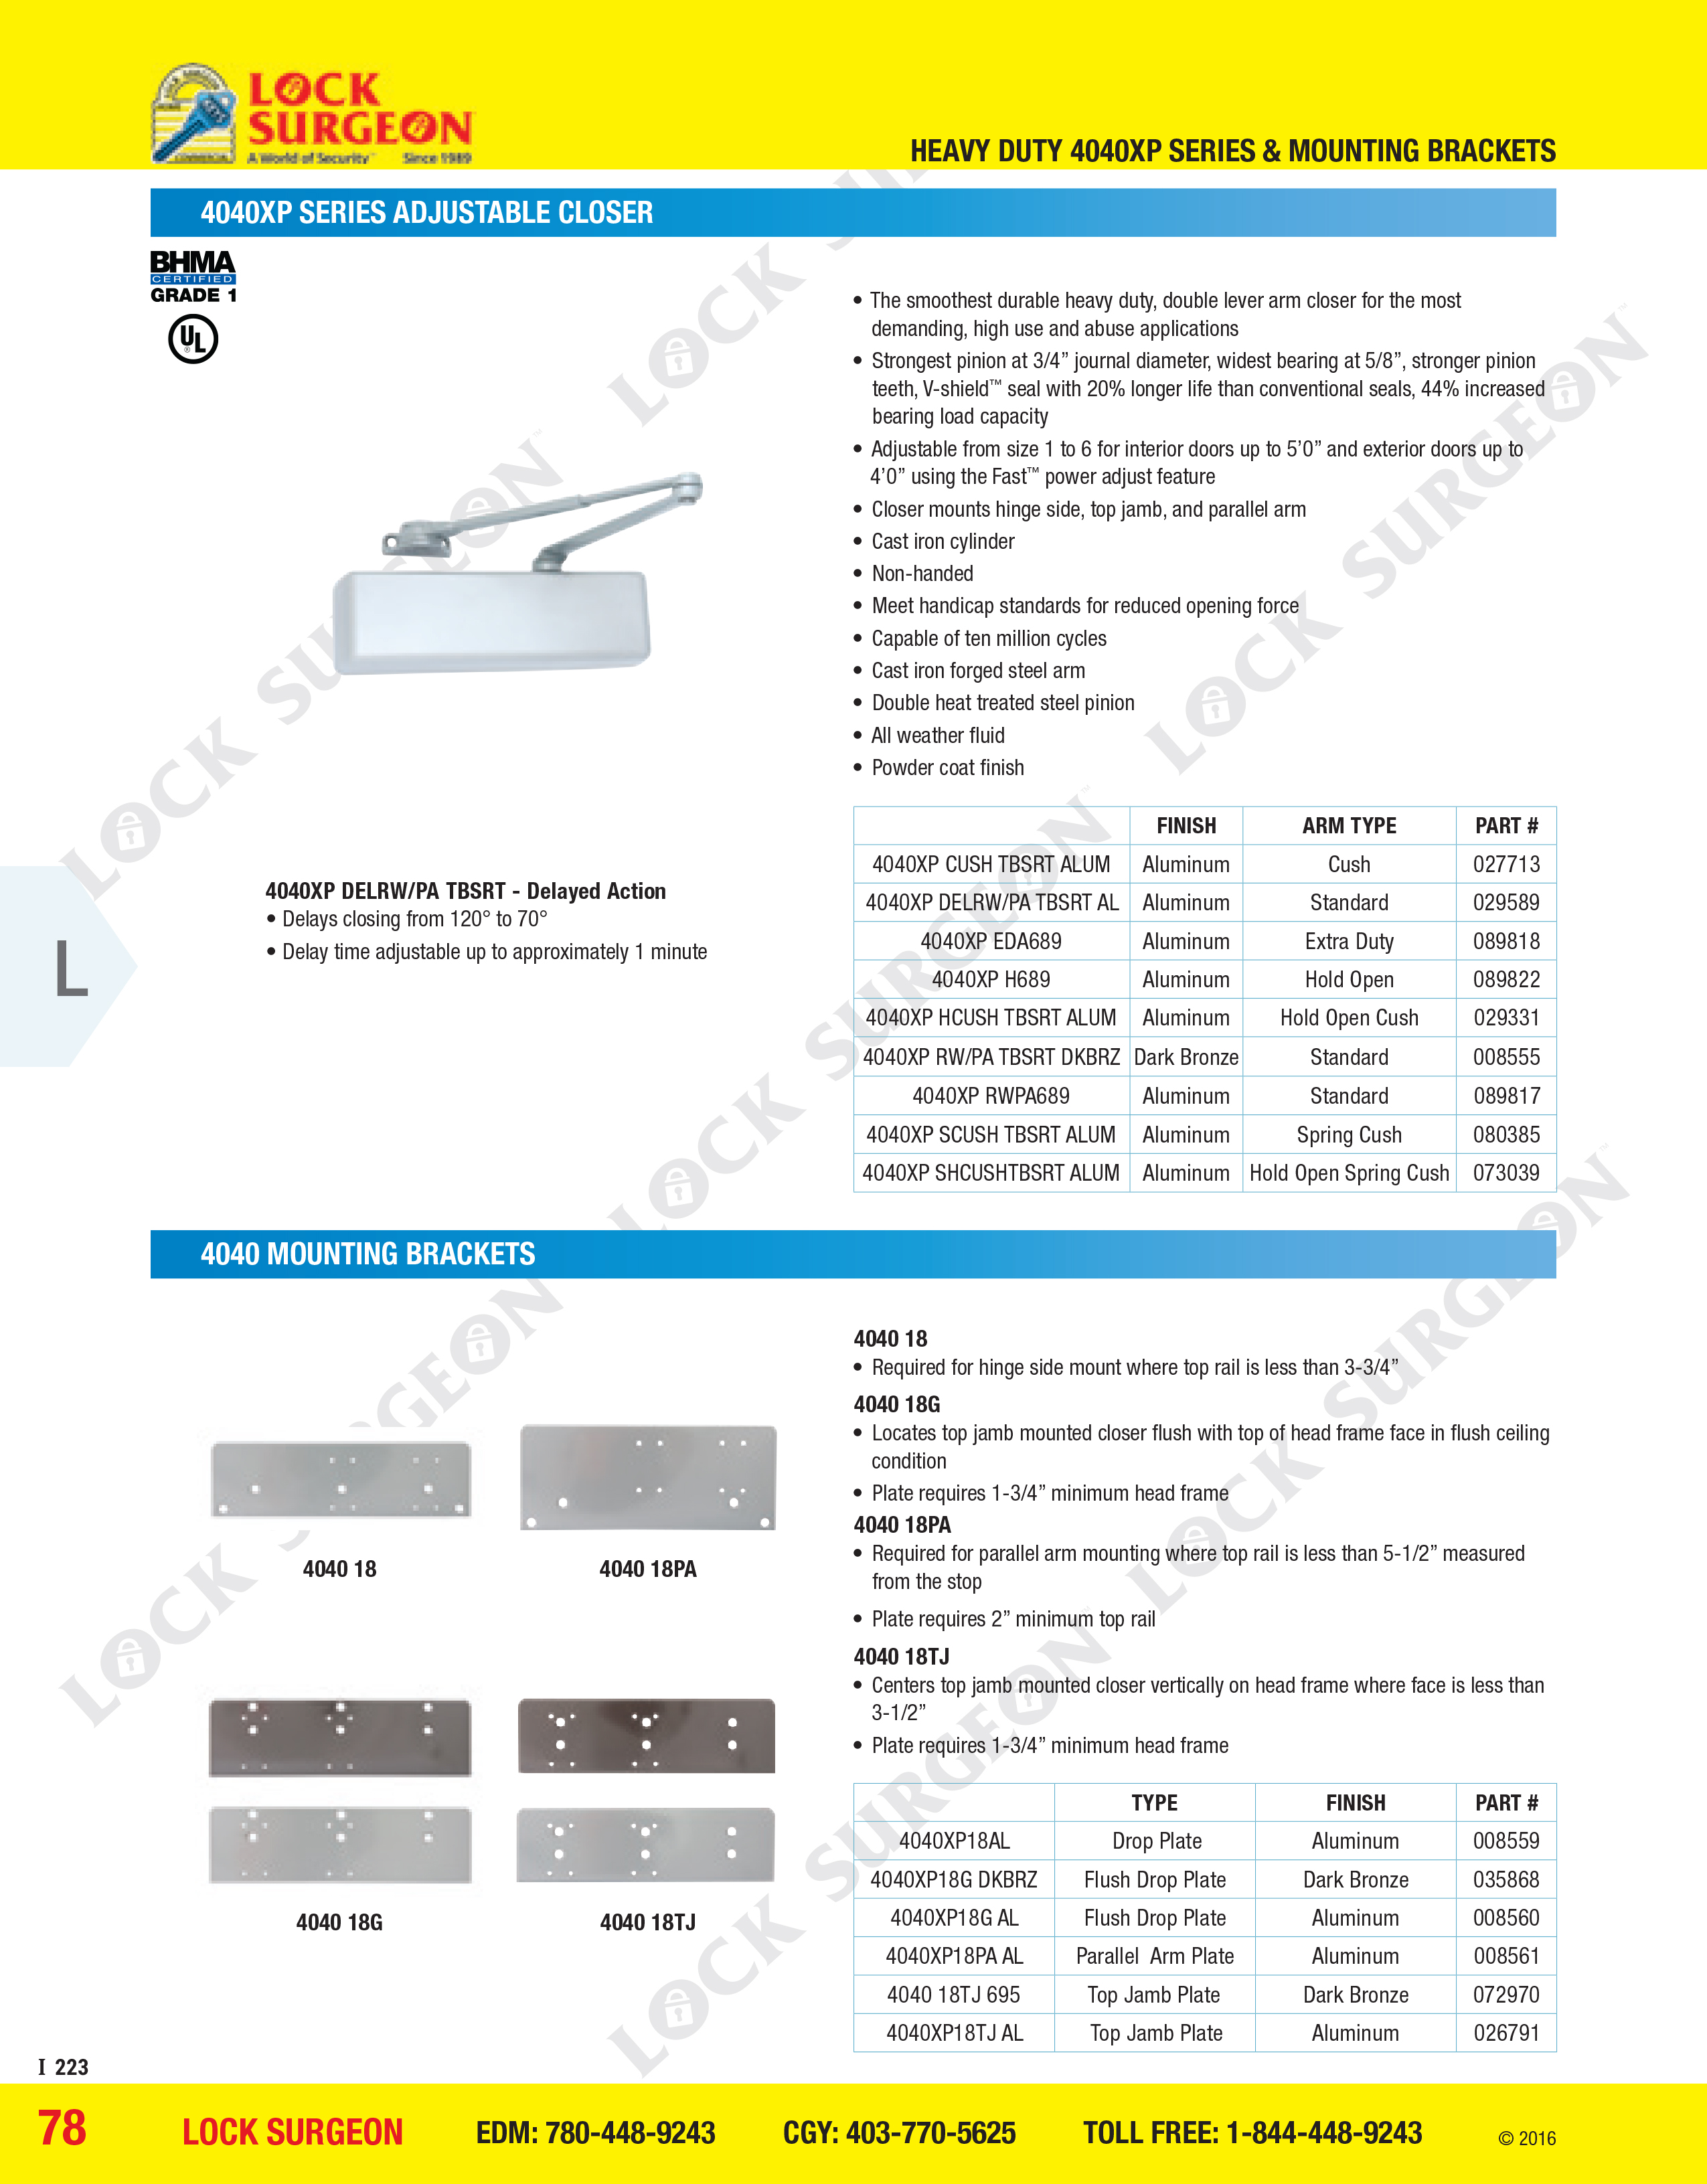 LCN Heavy Duty 4040XP Series Adjustable Closer and mounting brackets.